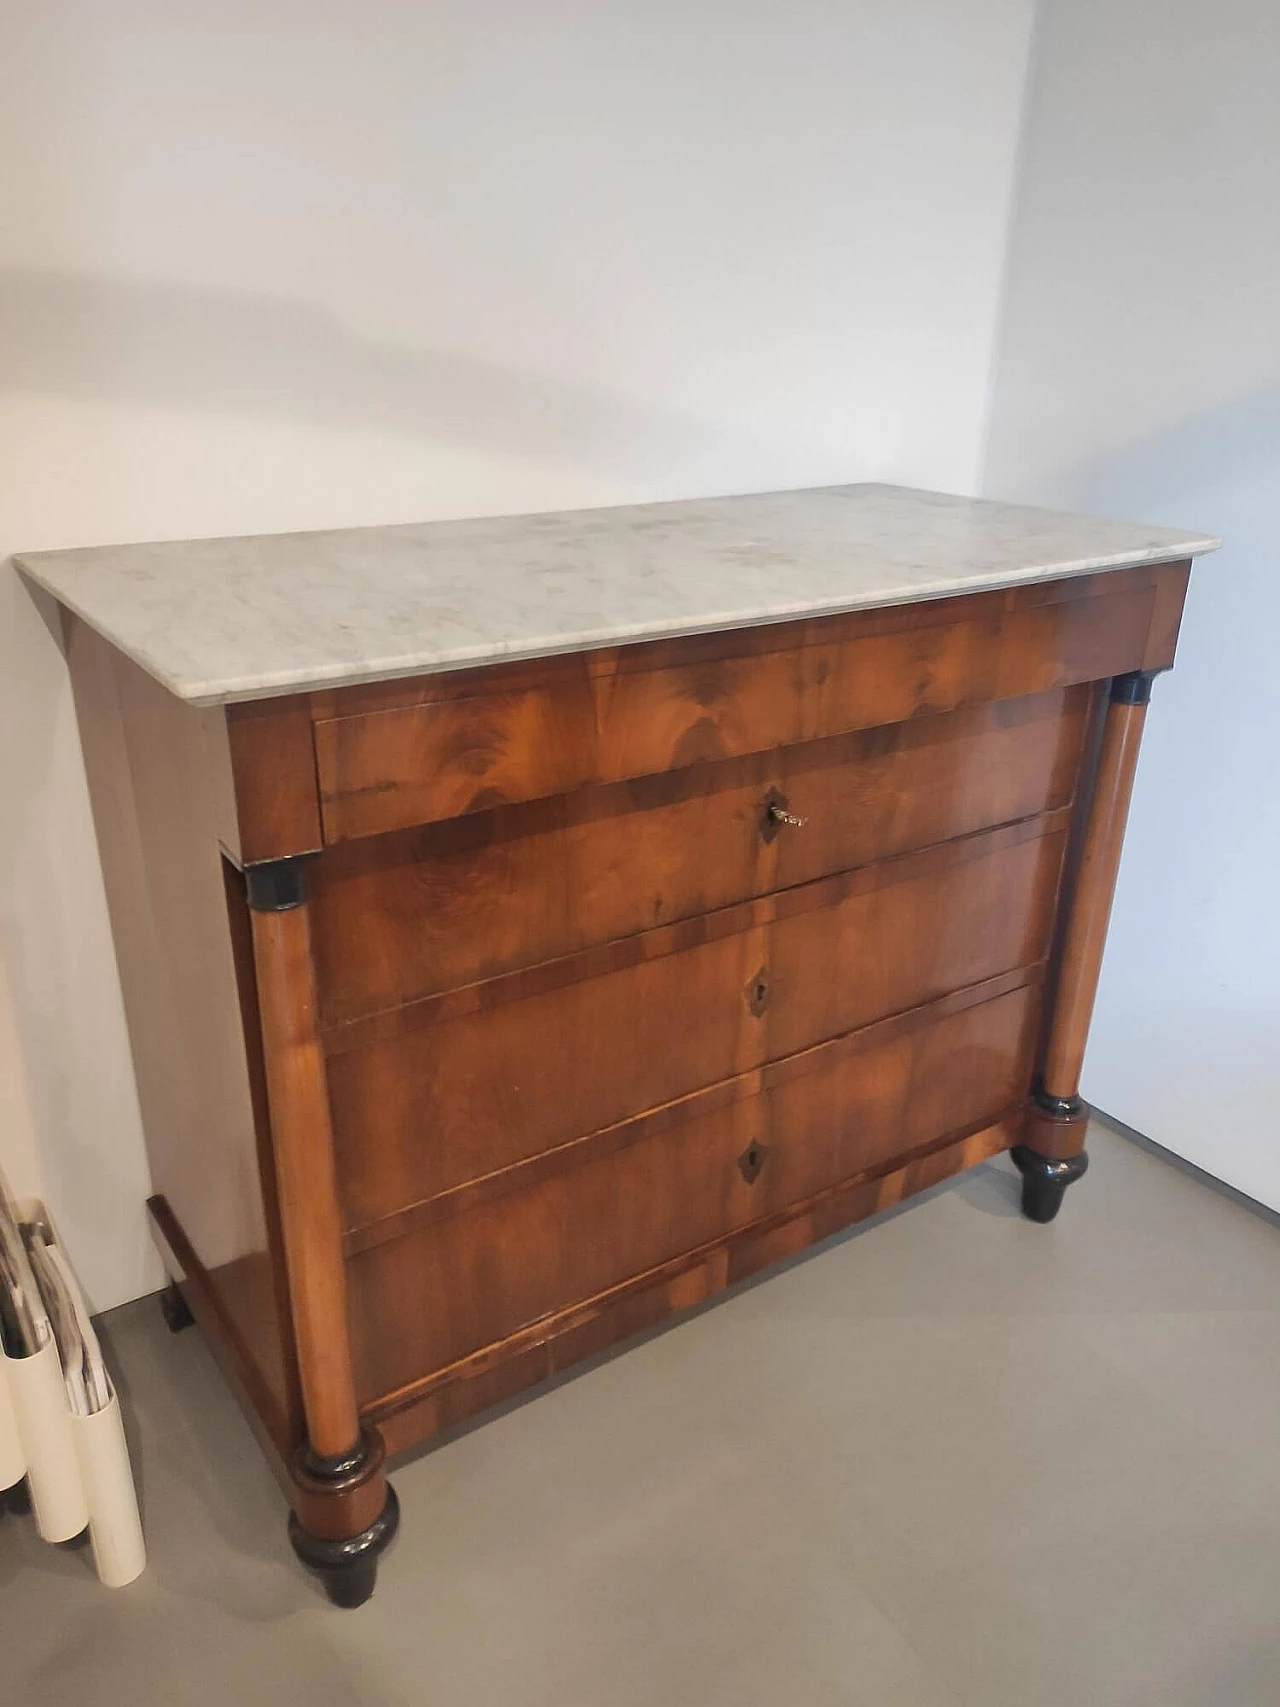 Empire chest of drawers in walnut with marble top, '800 1225961